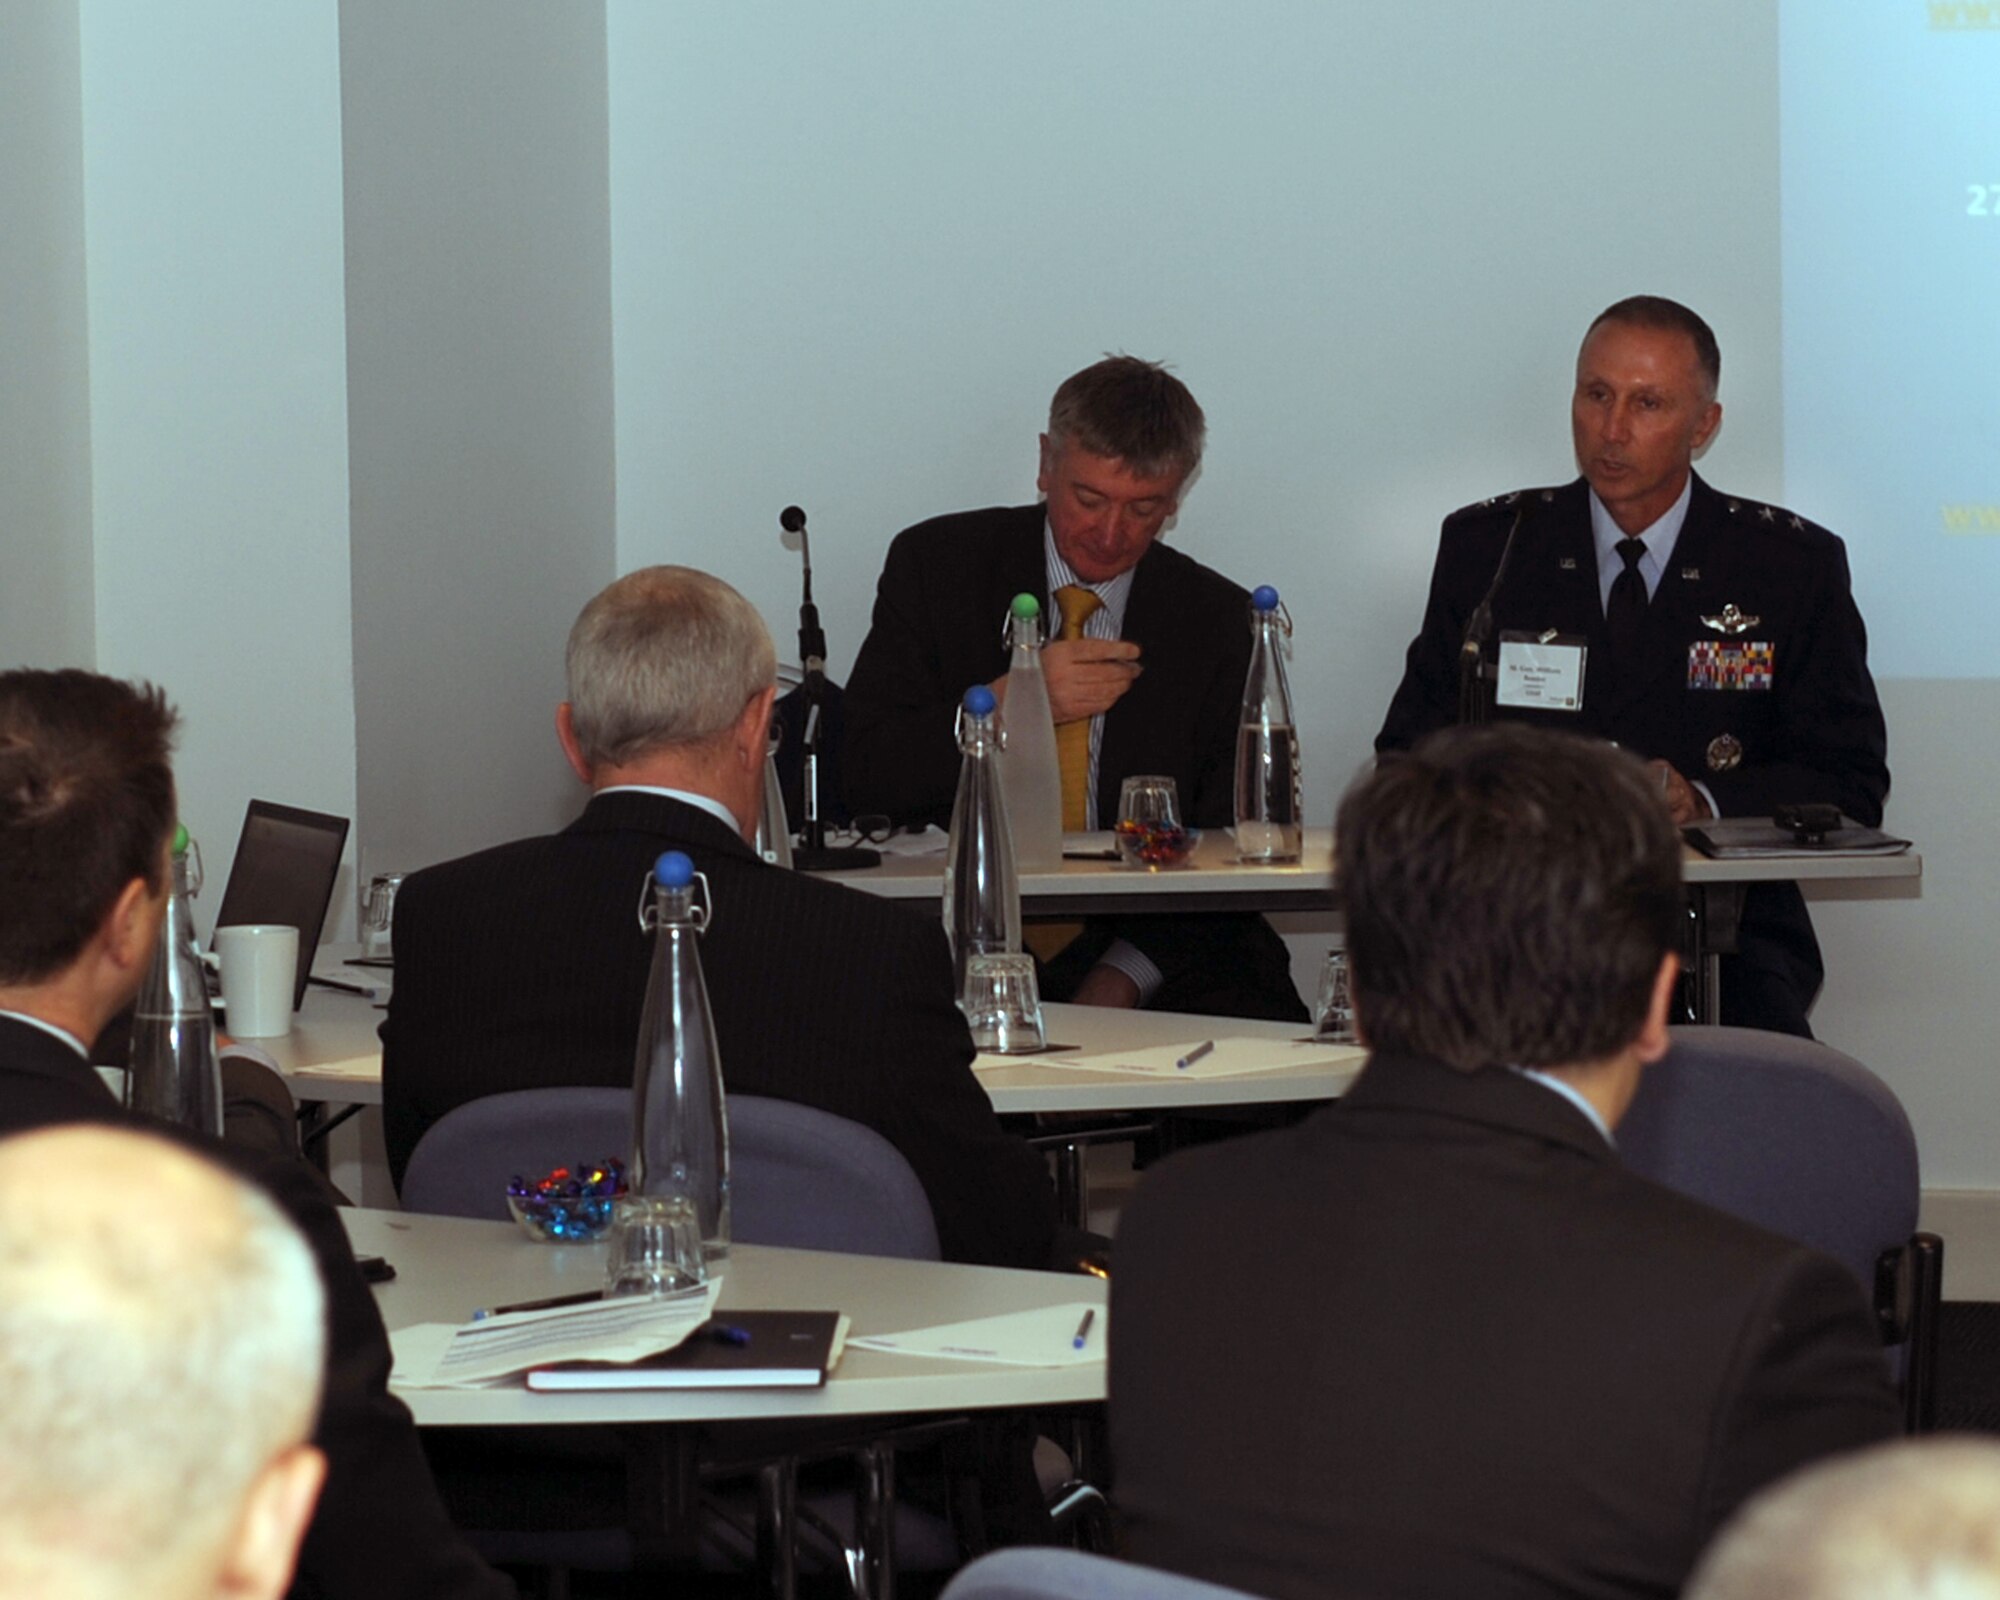 Maj. Gen. William Bender, U.S. Air Force Expeditionary Center commander, addresses representatives from NATO and the U.S. at a conference in London, Sept. 26, 2012. Key topics of discussion focused on ways to more effectively conduct military airlift operations. The general elaborated on the future of the C-130J Super-Hercules program, the KC-46 fleet and how NATO and the U.S. could ill afford to throw teamwork by the wayside. Additionally, Bender made a site visit to RAF Mildenhall’s 727th Air Mobility Squadron, a tenant unit there under his chain of command. (U.S. Air Force photo/2nd Lt Christopher Mesnard)